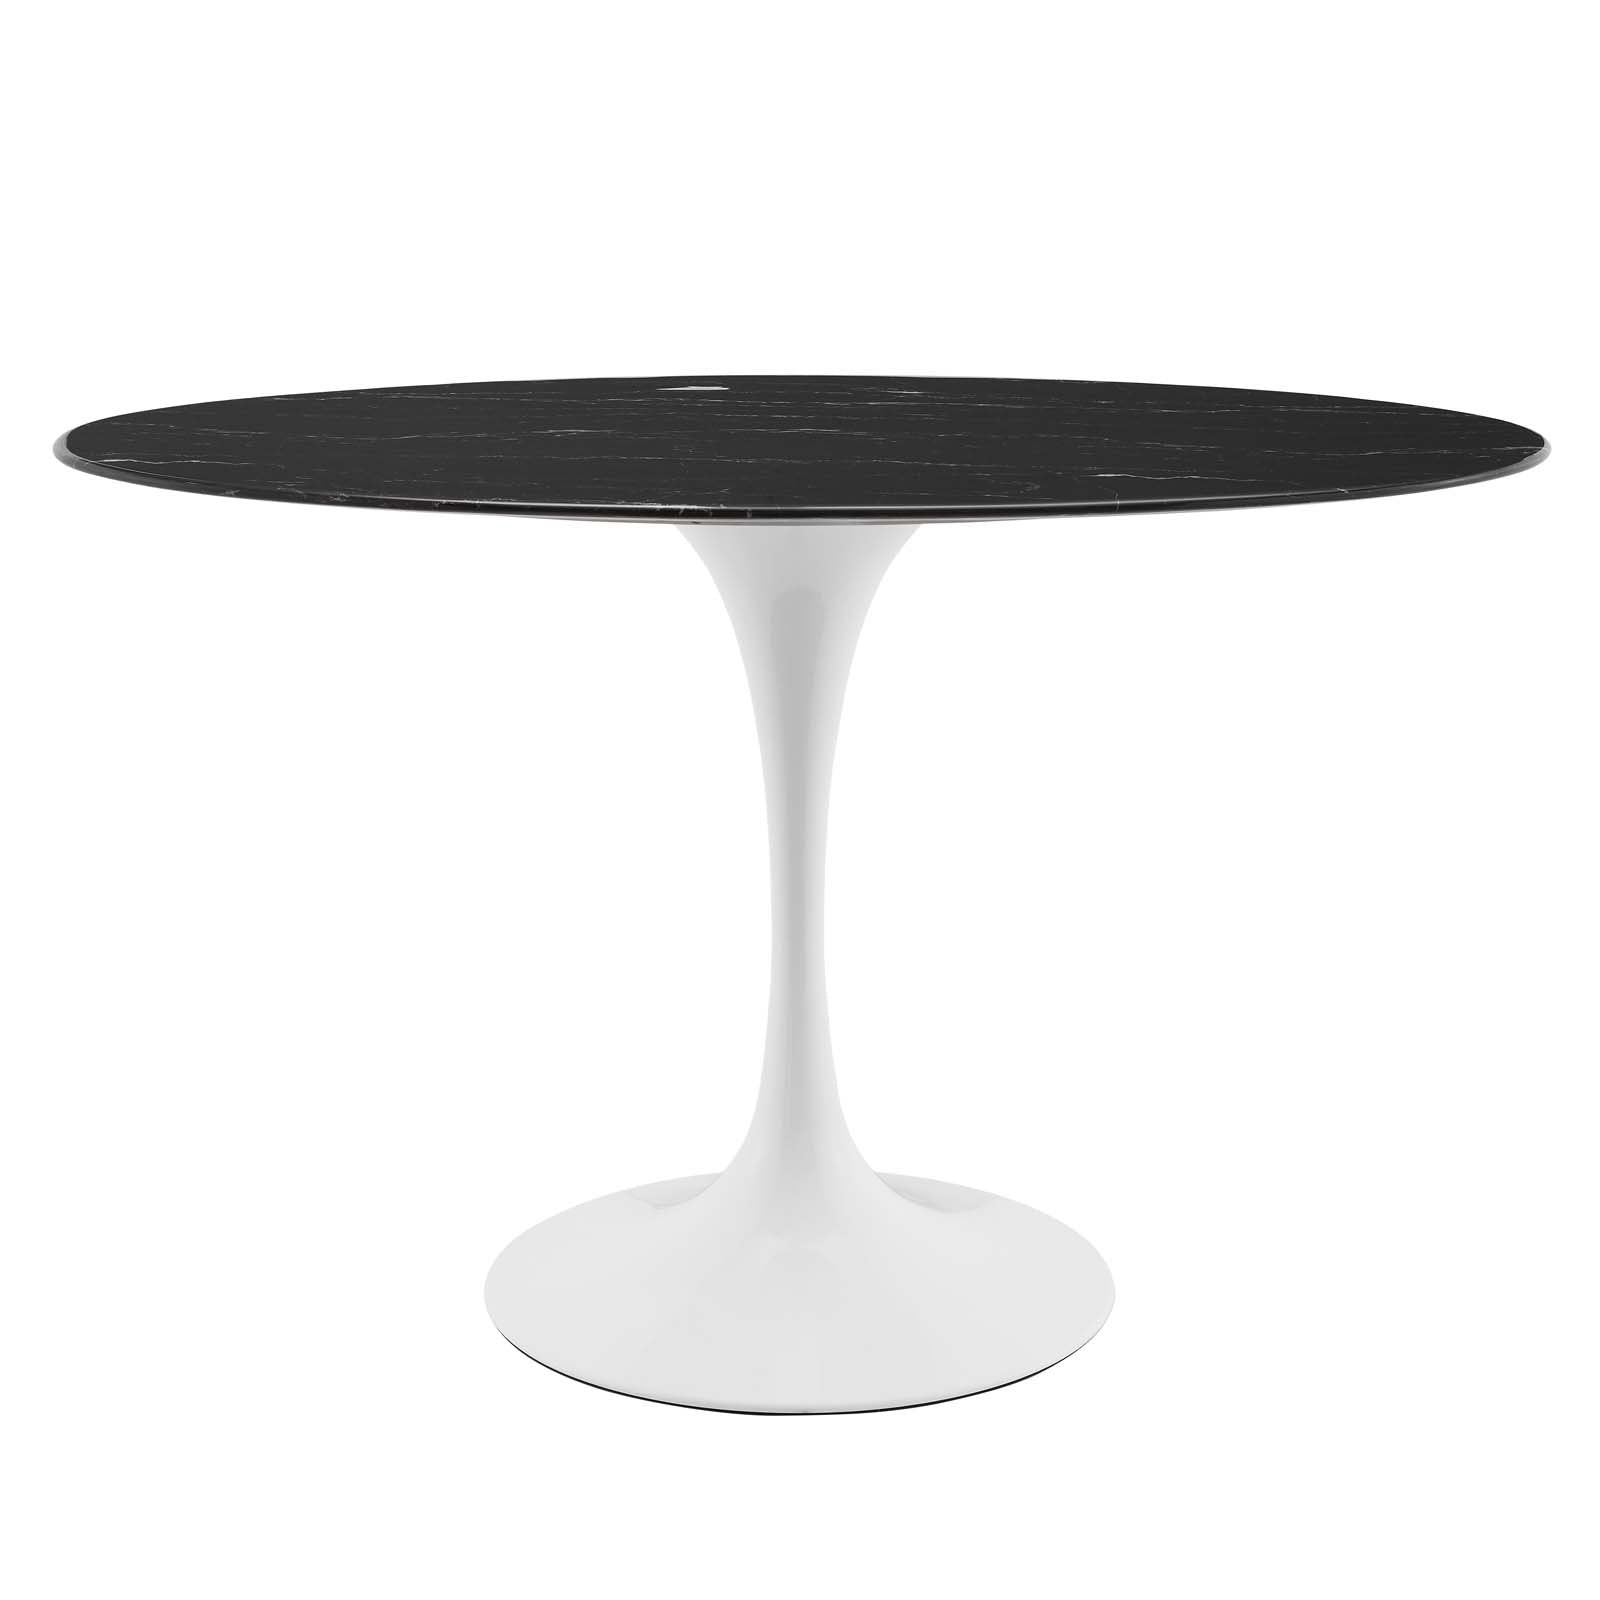 Lippa 48" Oval Artificial Marble Dining Table